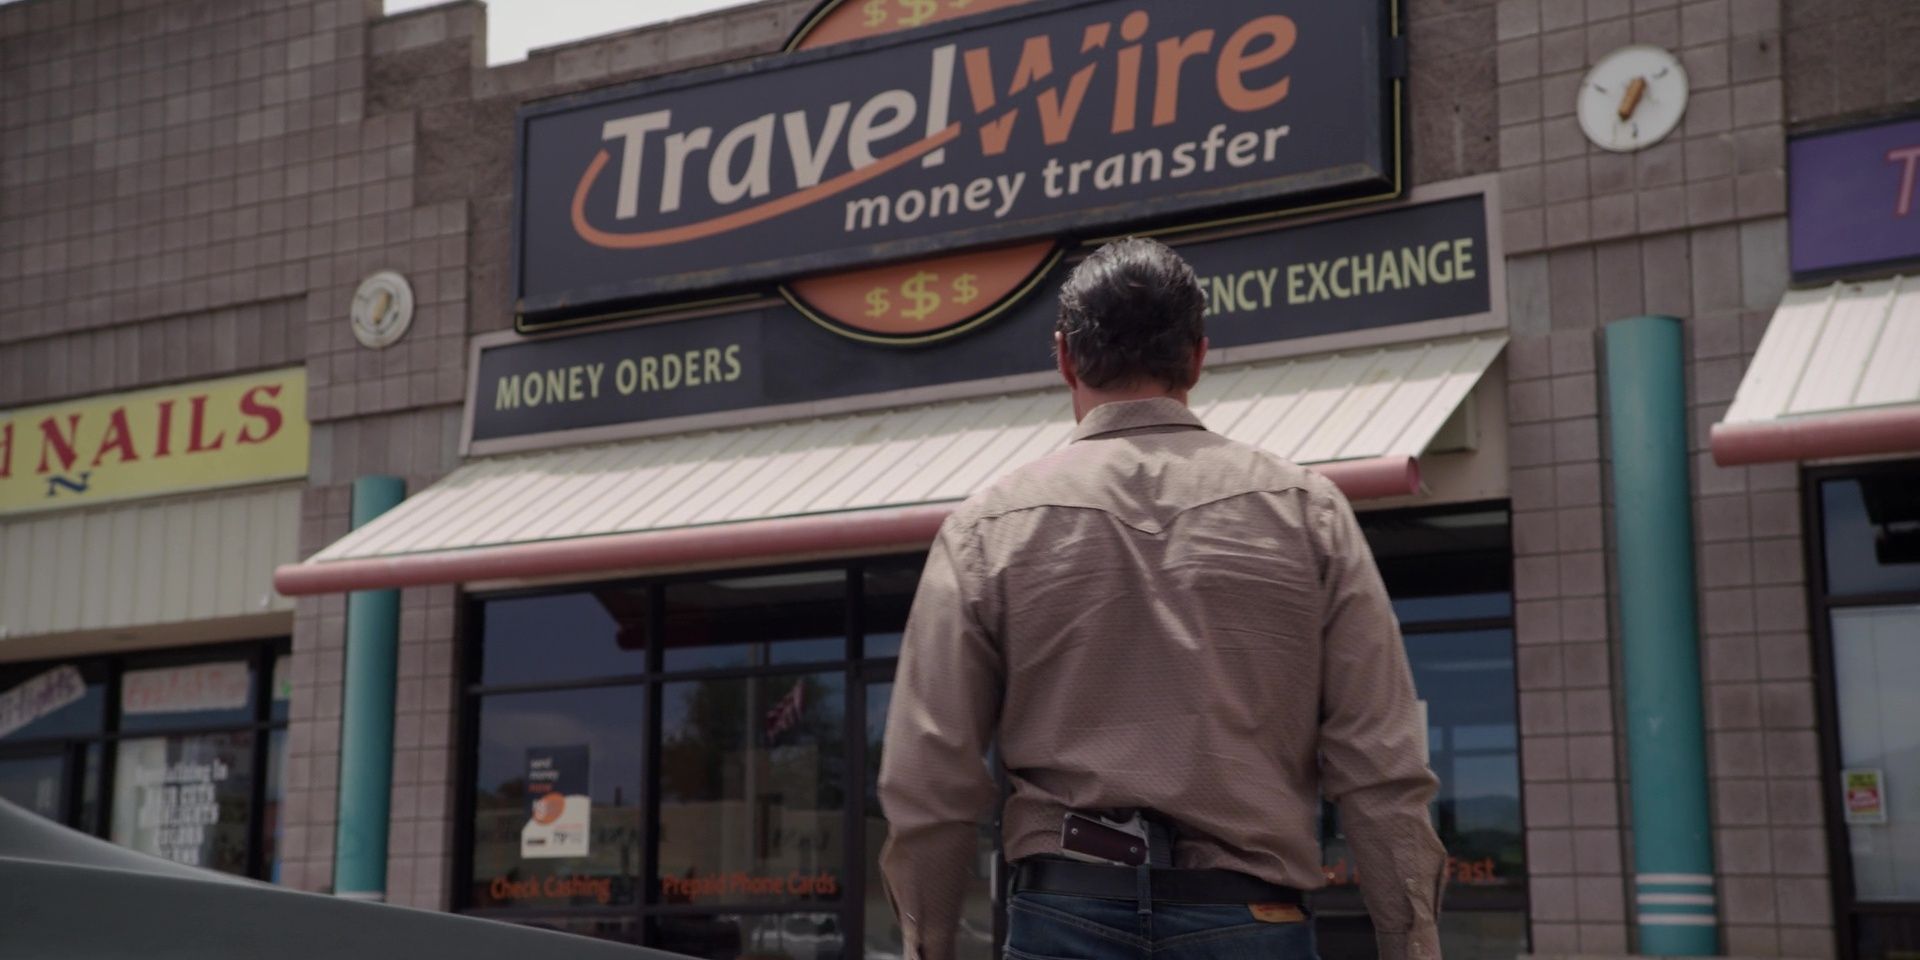 Lalo entering a TravelWire branch